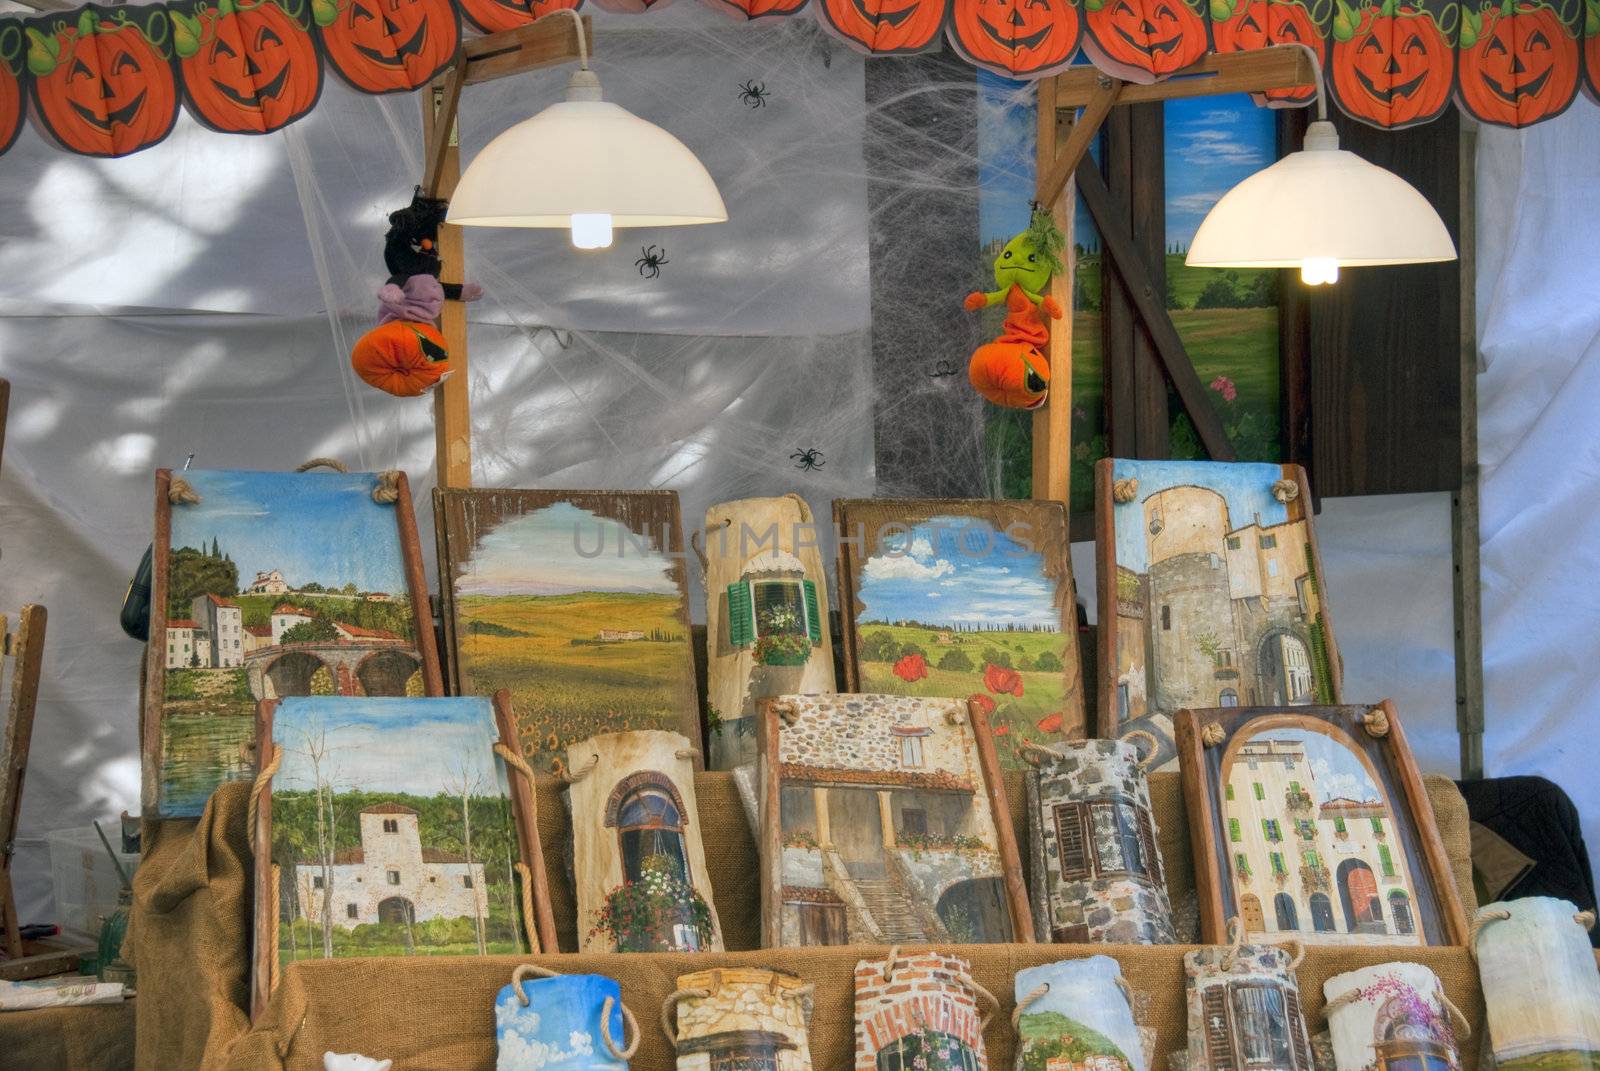 Paintings in a Market, Lucca, Italy